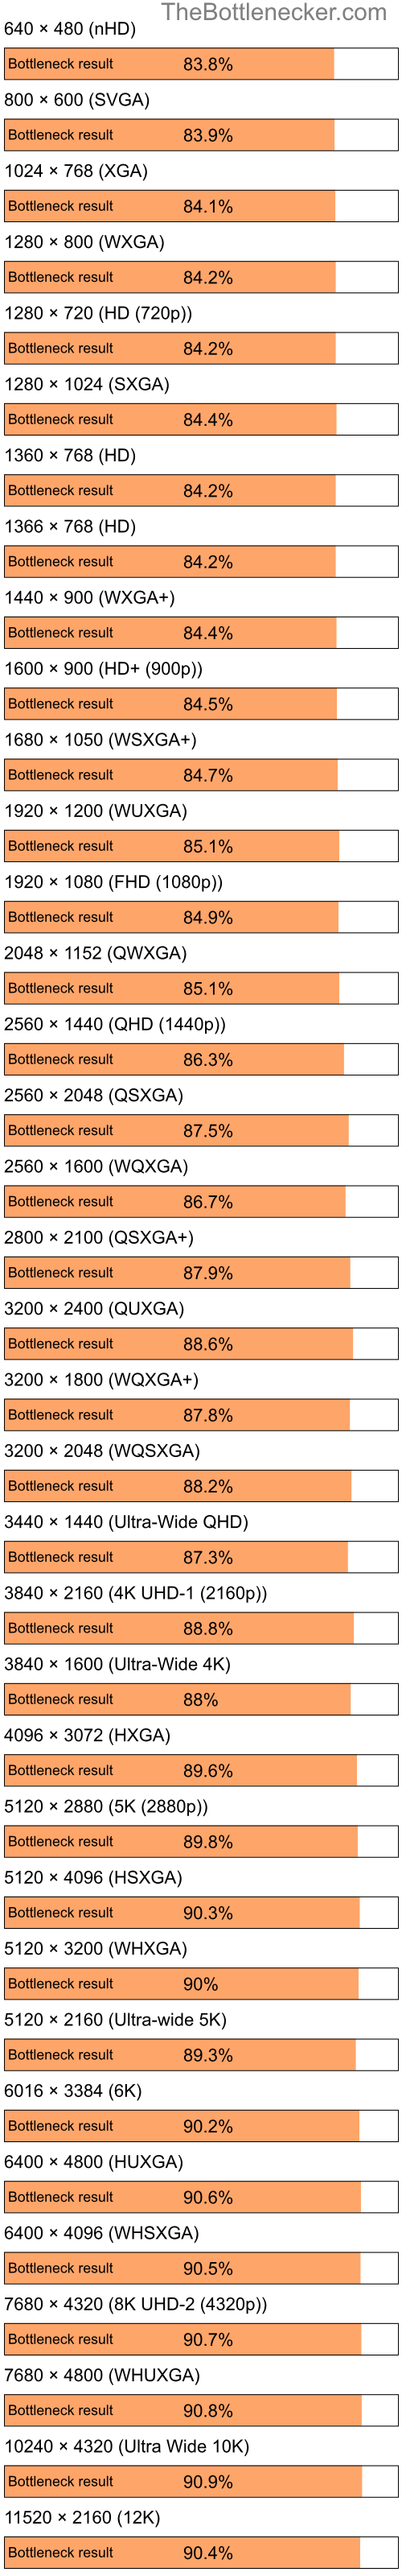 Bottleneck results by resolution for Intel Pentium 4 and NVIDIA GeForce4 MX Integrated GPU in Processor Intense Tasks